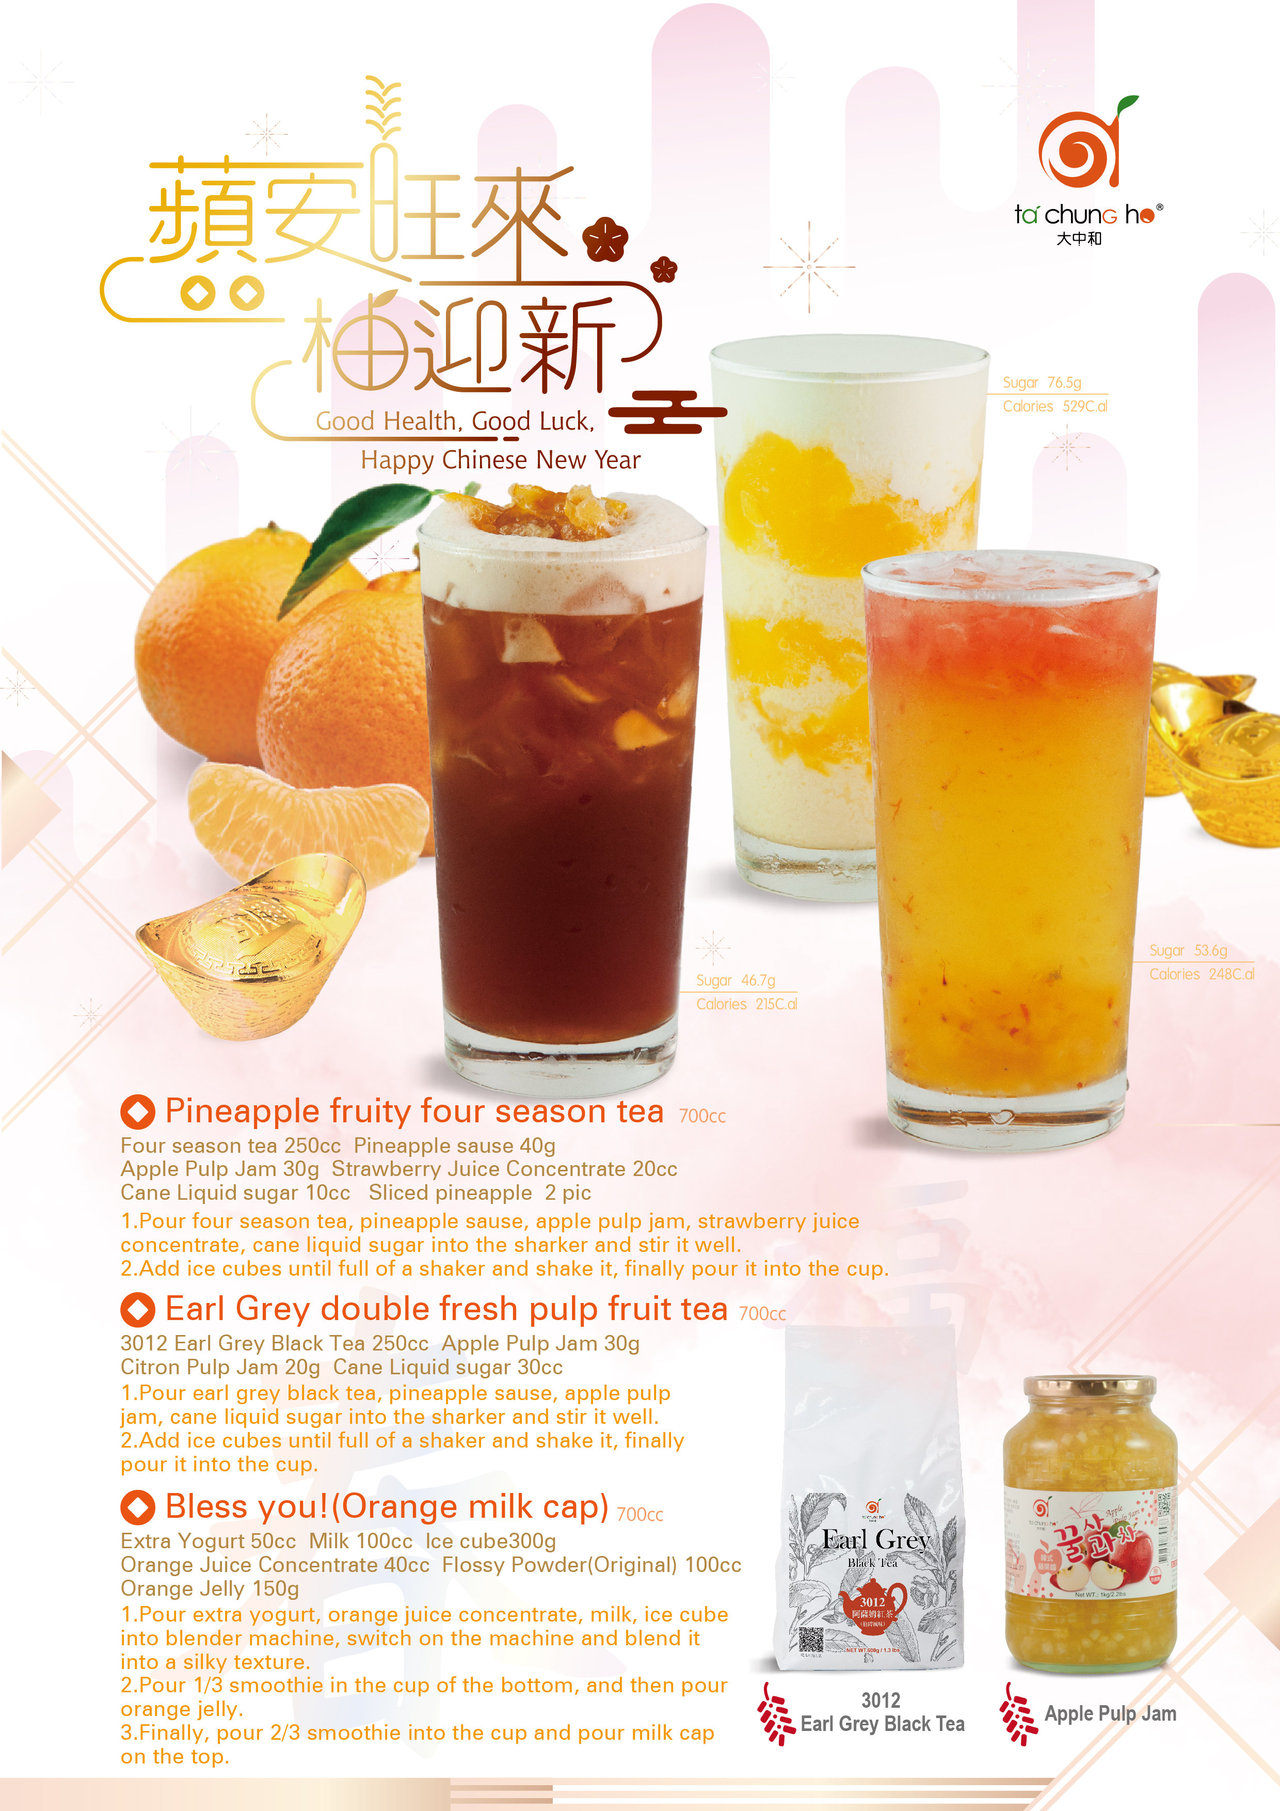 2021●Good Health, Good Luck, Happy Chinese New Year - Chinese New Year,Assam tea,Orange Juice Concentrate,Strawberry Juice Concentrate,bubbletea,milktea